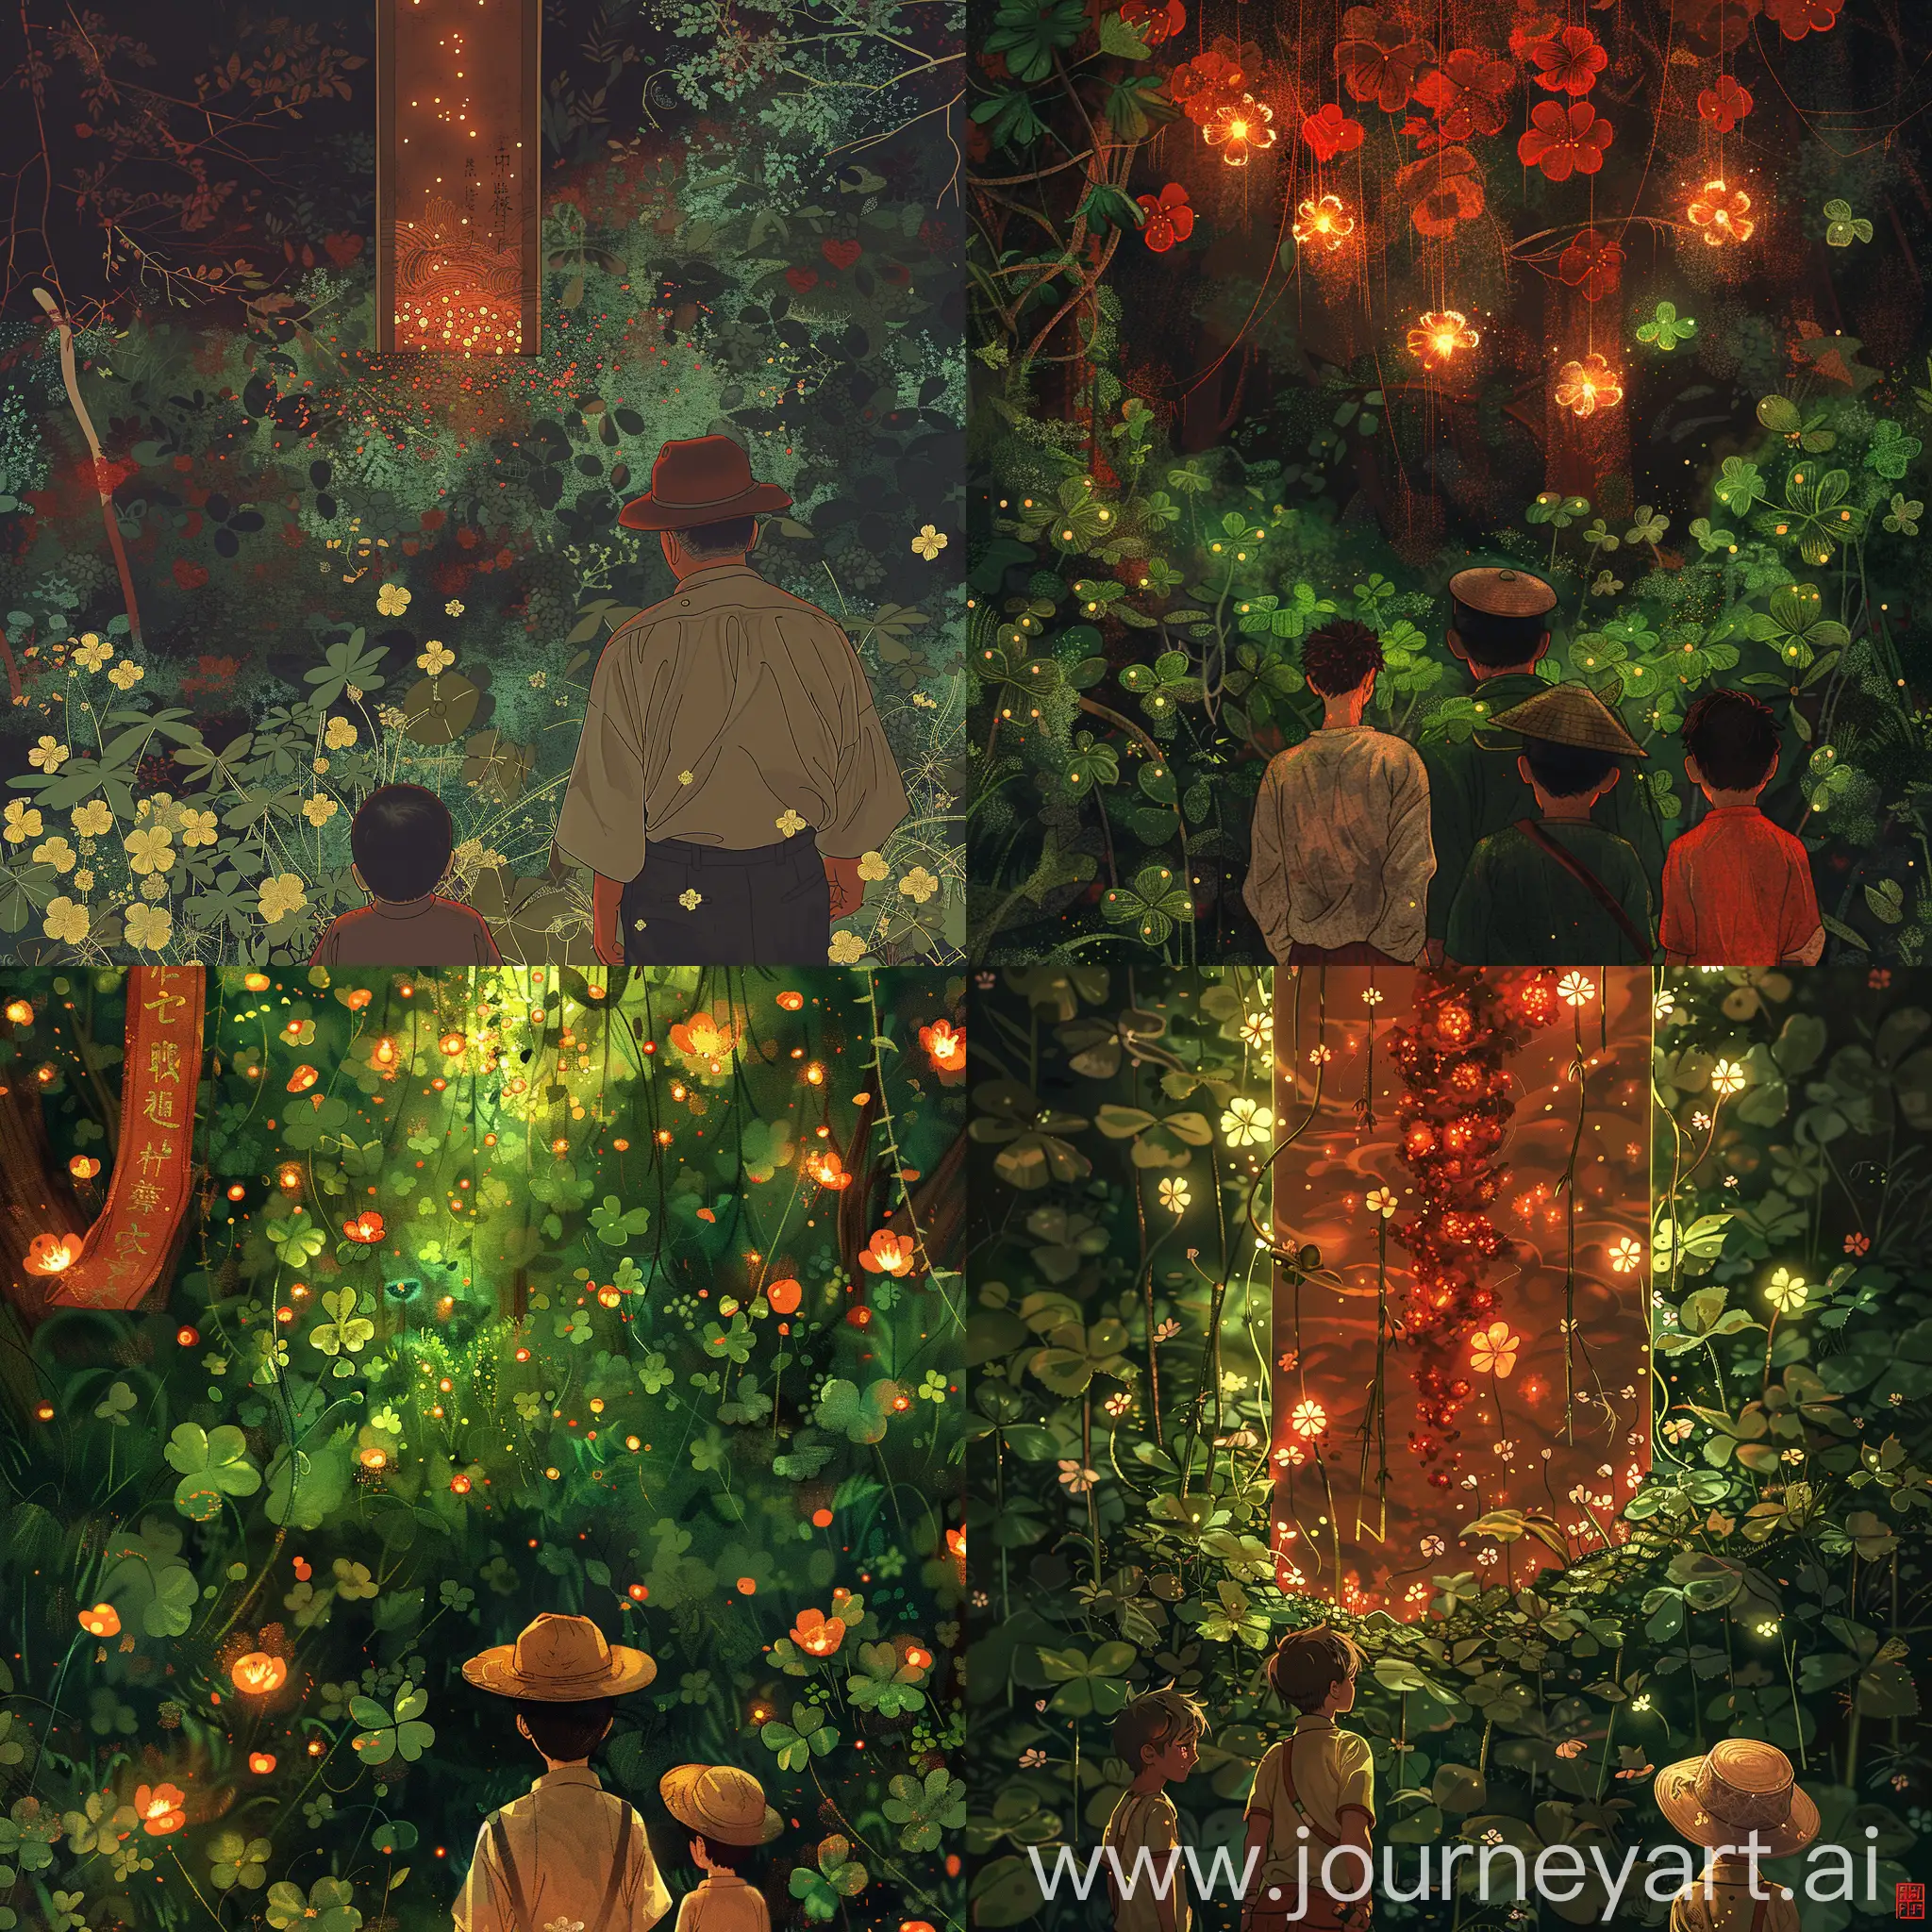 an illustration forest exploration a japan on outdoor hat a man with a 2boys, looking ((clover flowers lights))(zoom up), clover flowers fields jungle, in the style of dark gold molten filigree and red, confessional, playful and whimsical designs, notable sense of movement, i can't believe how beautiful this is, high-angle, hanging scroll